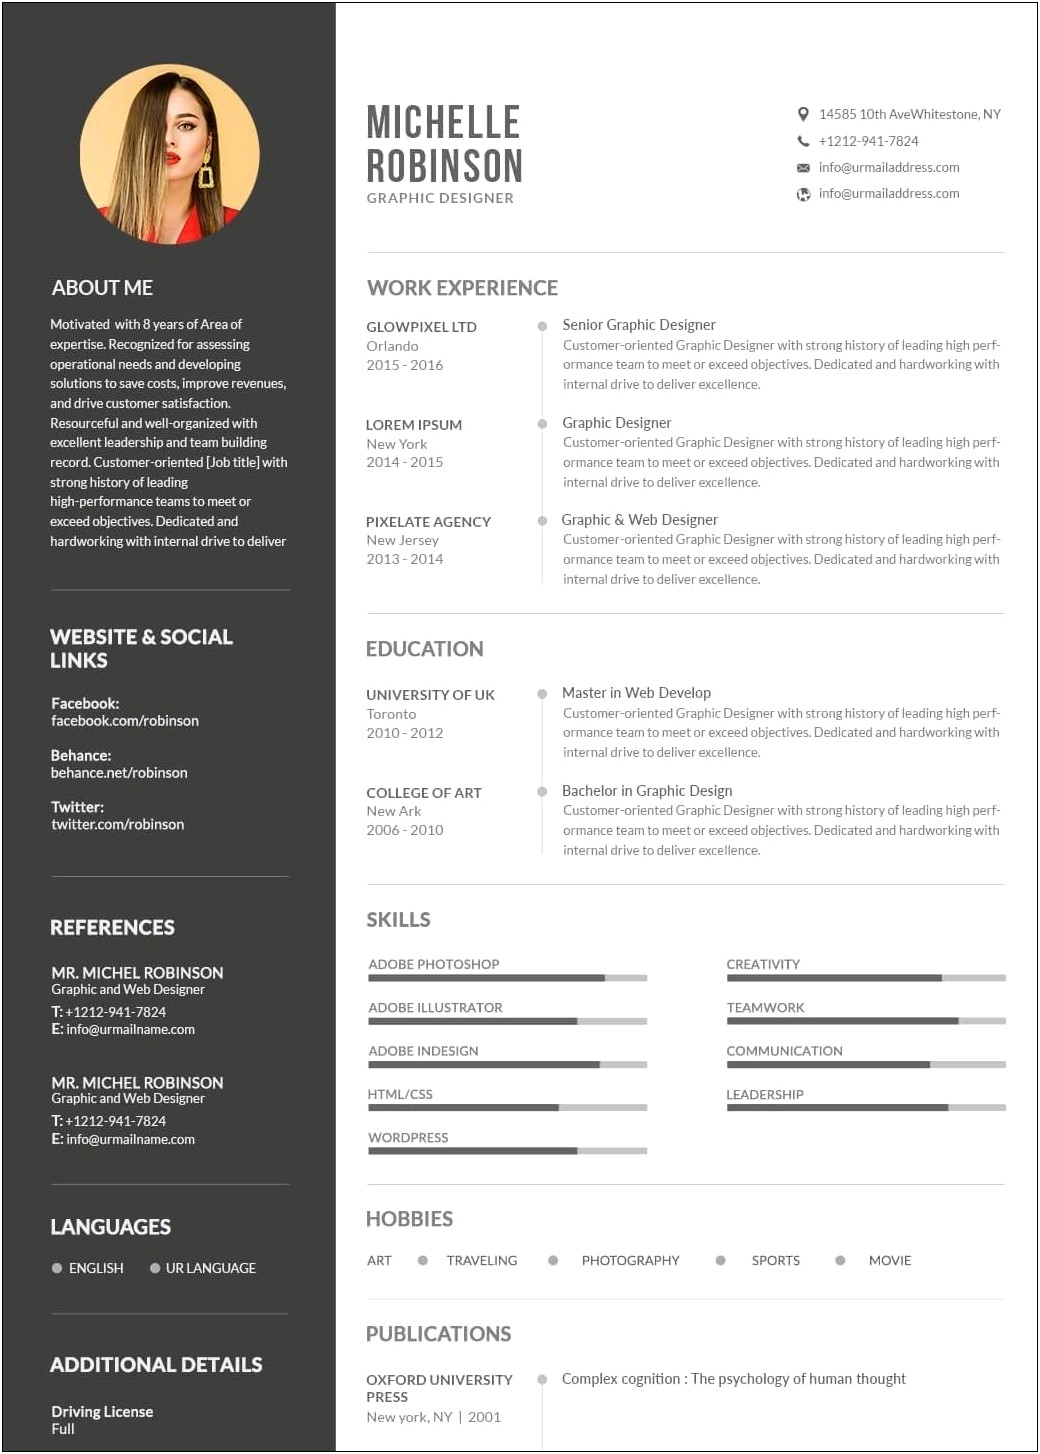 Personal Statement Resume Examples Graphic Design